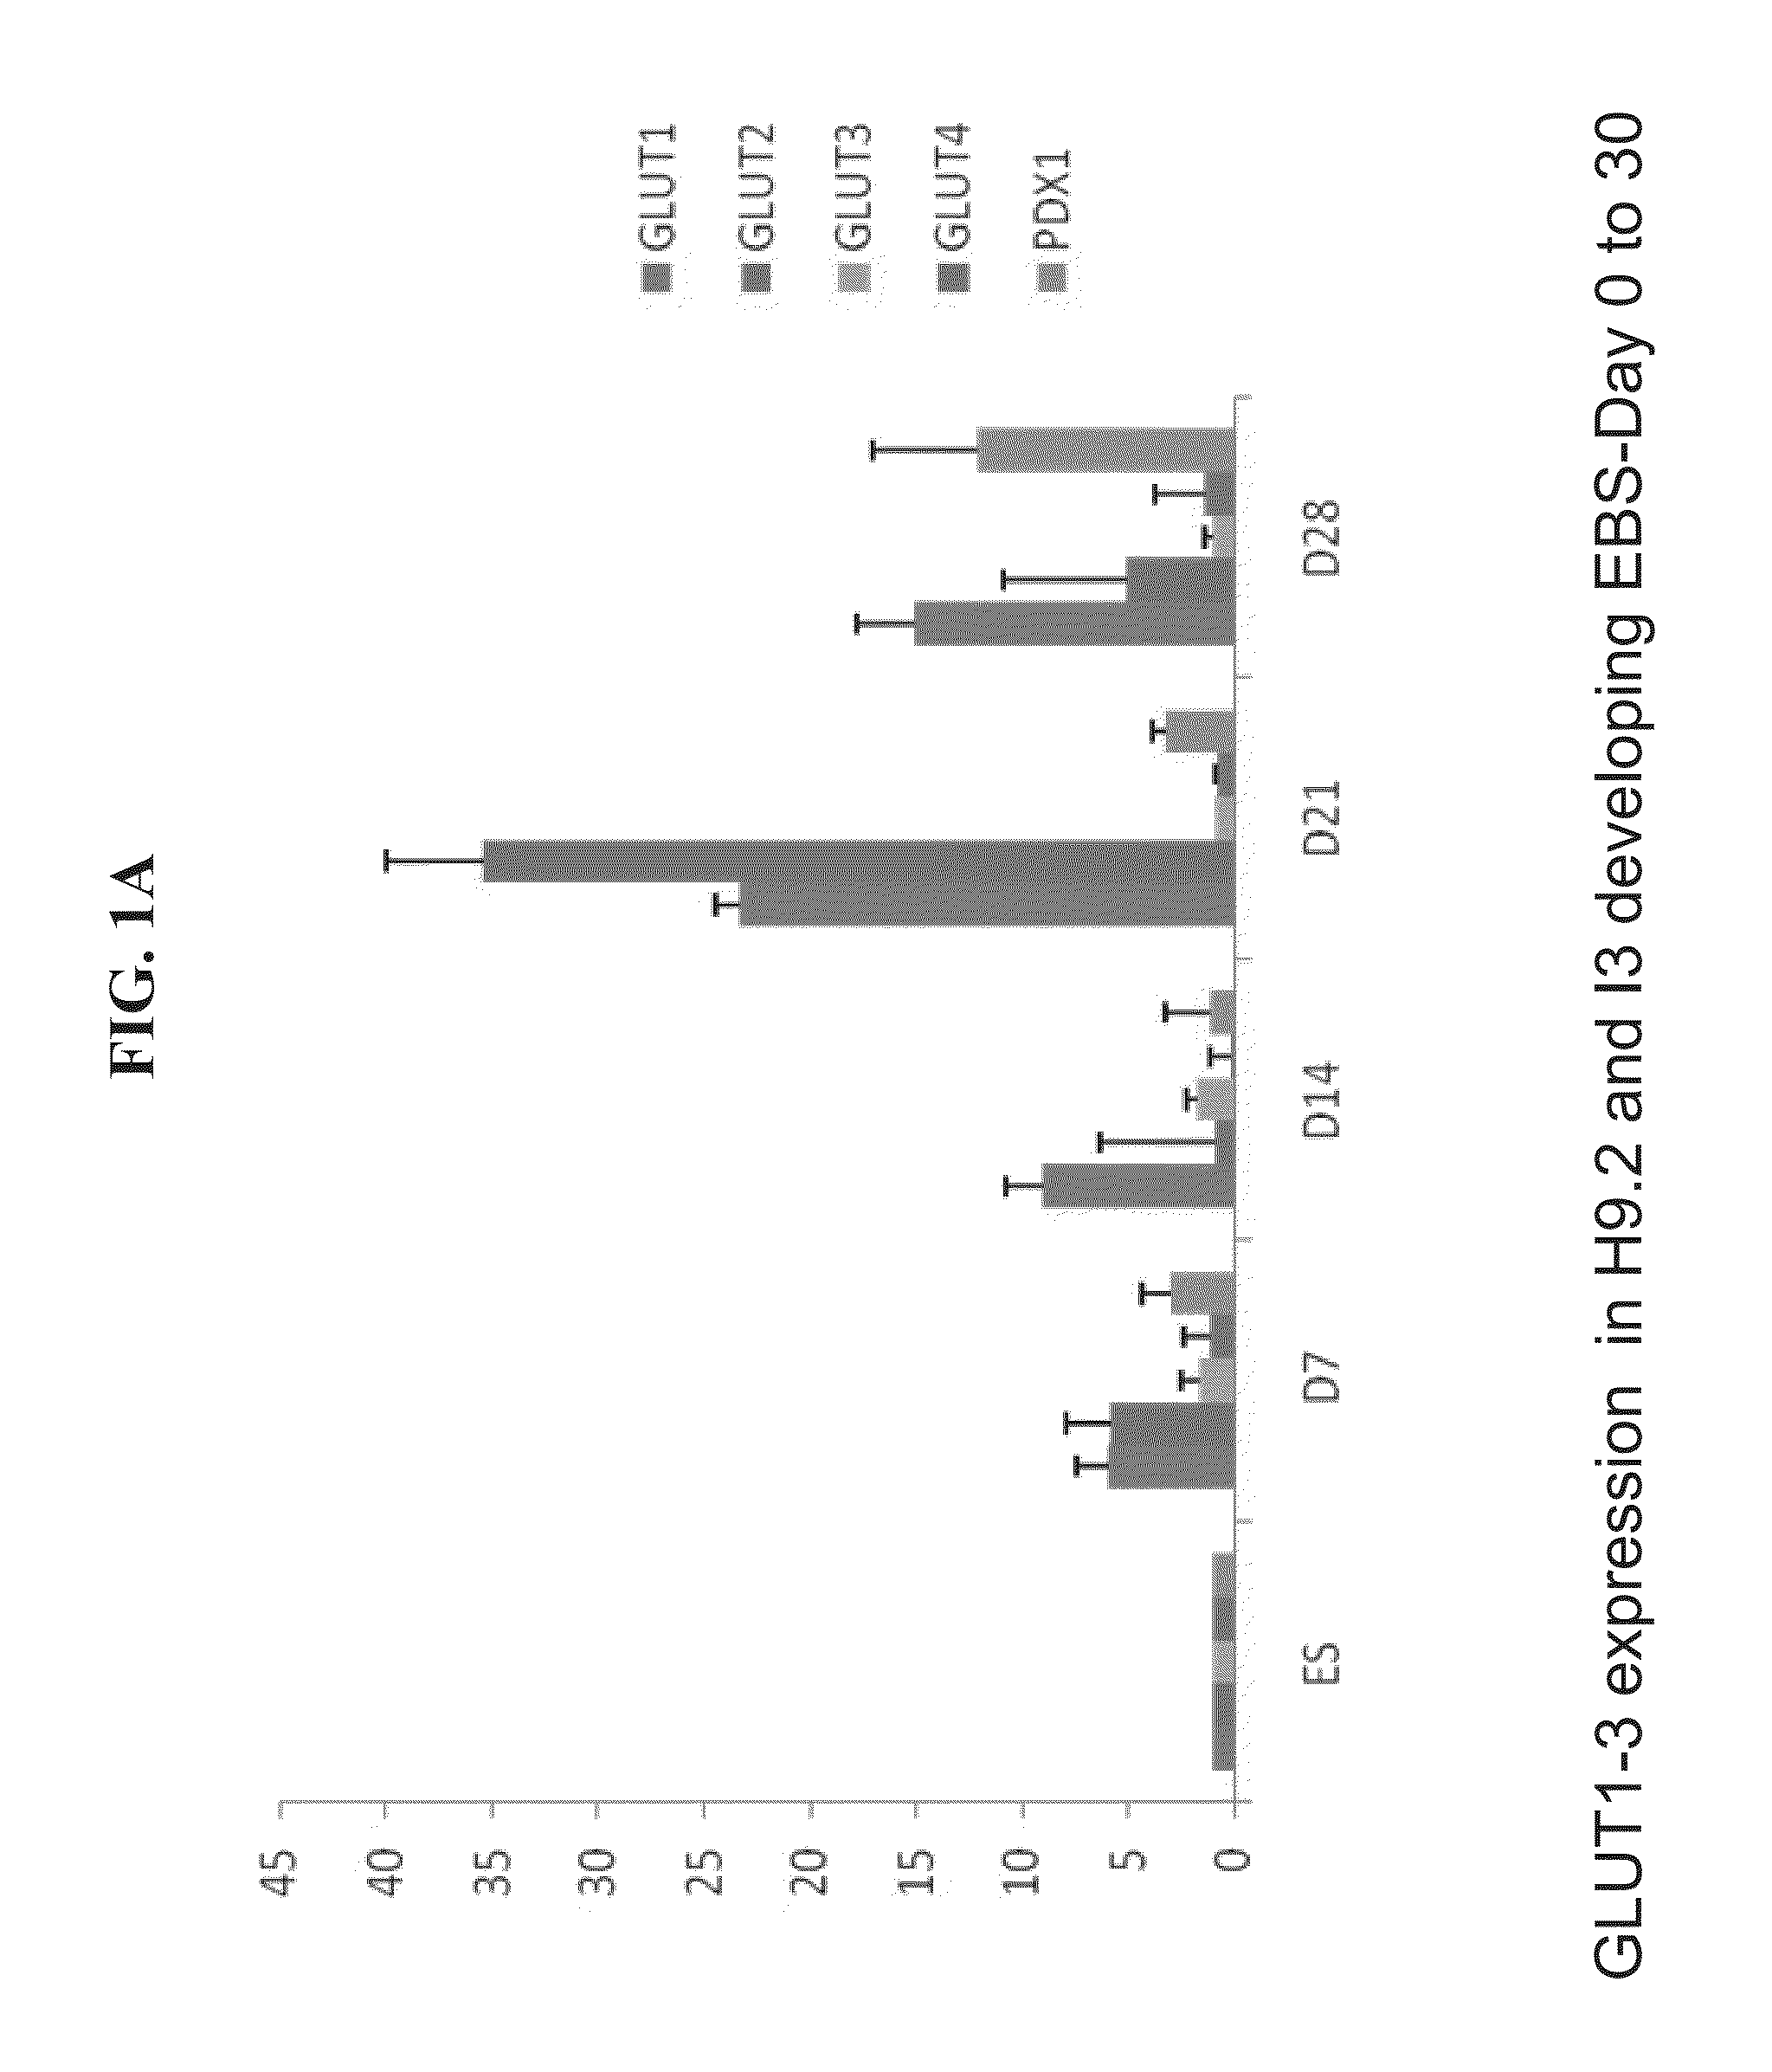 Populations of pancreatic progenitor cells and methods of isolating and using same